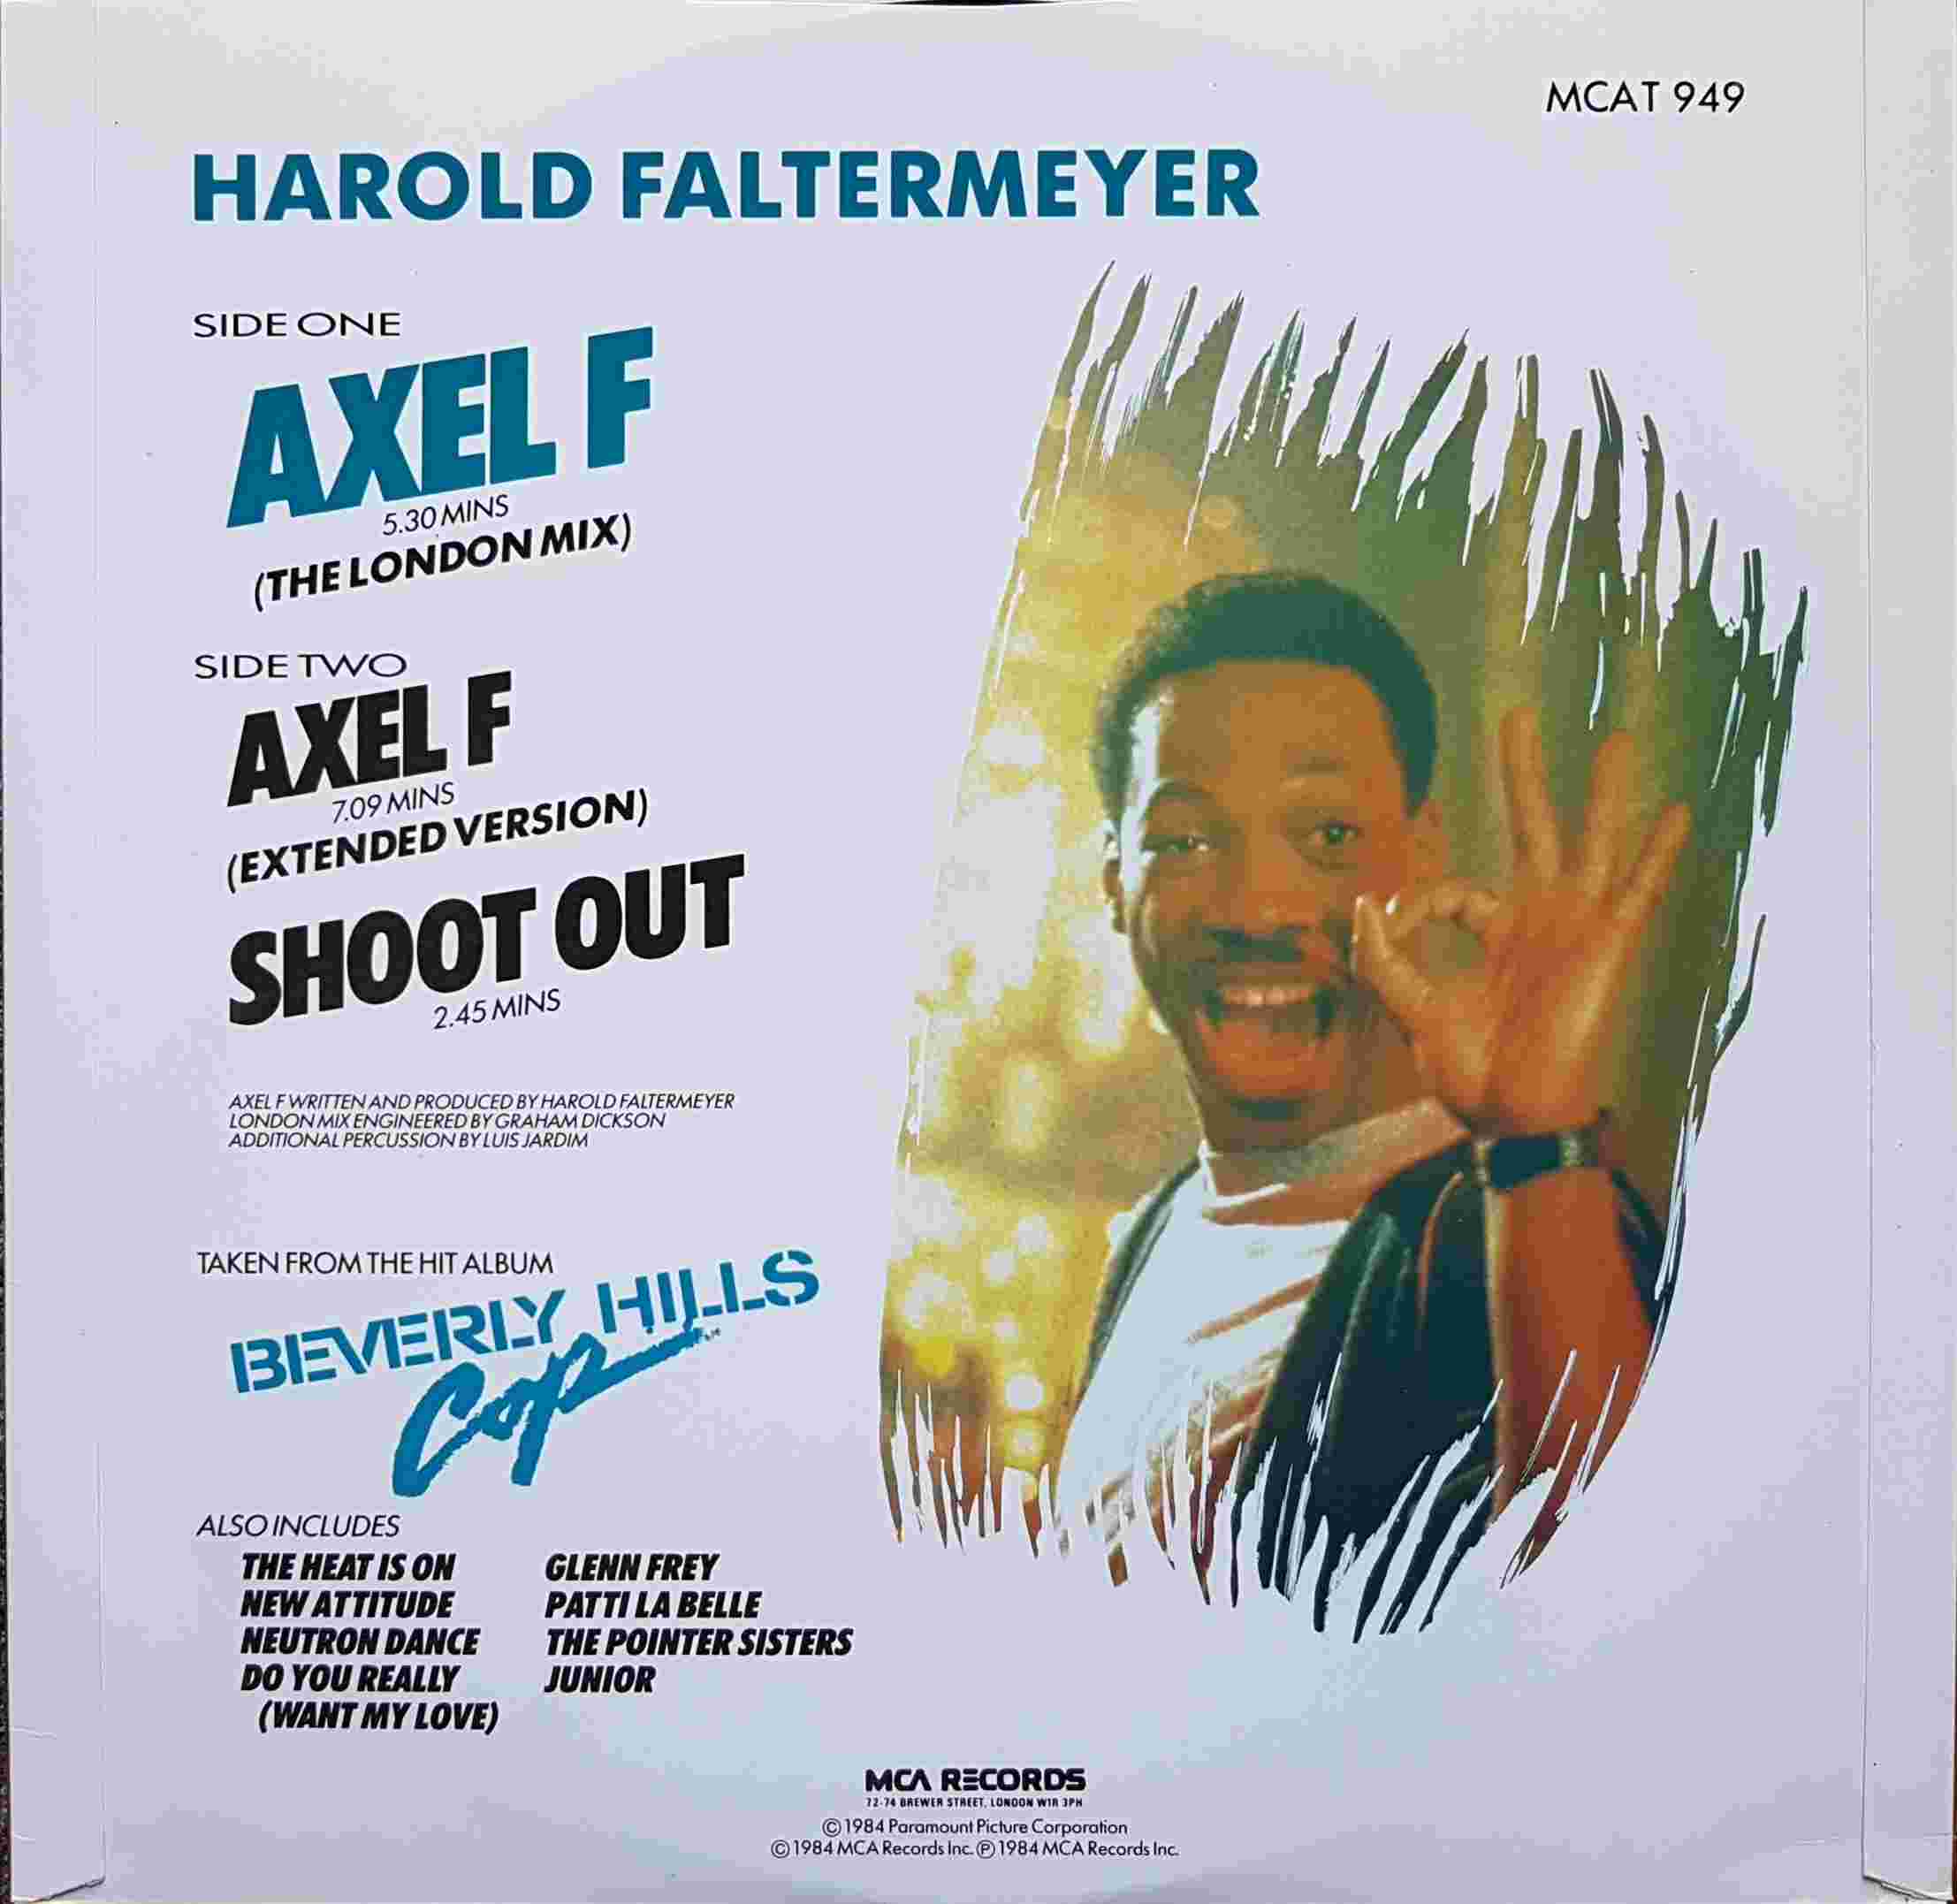 Picture of MCAT 949 Axel F by artist Harold Faltermeyer from ITV, Channel 4 and Channel 5 library